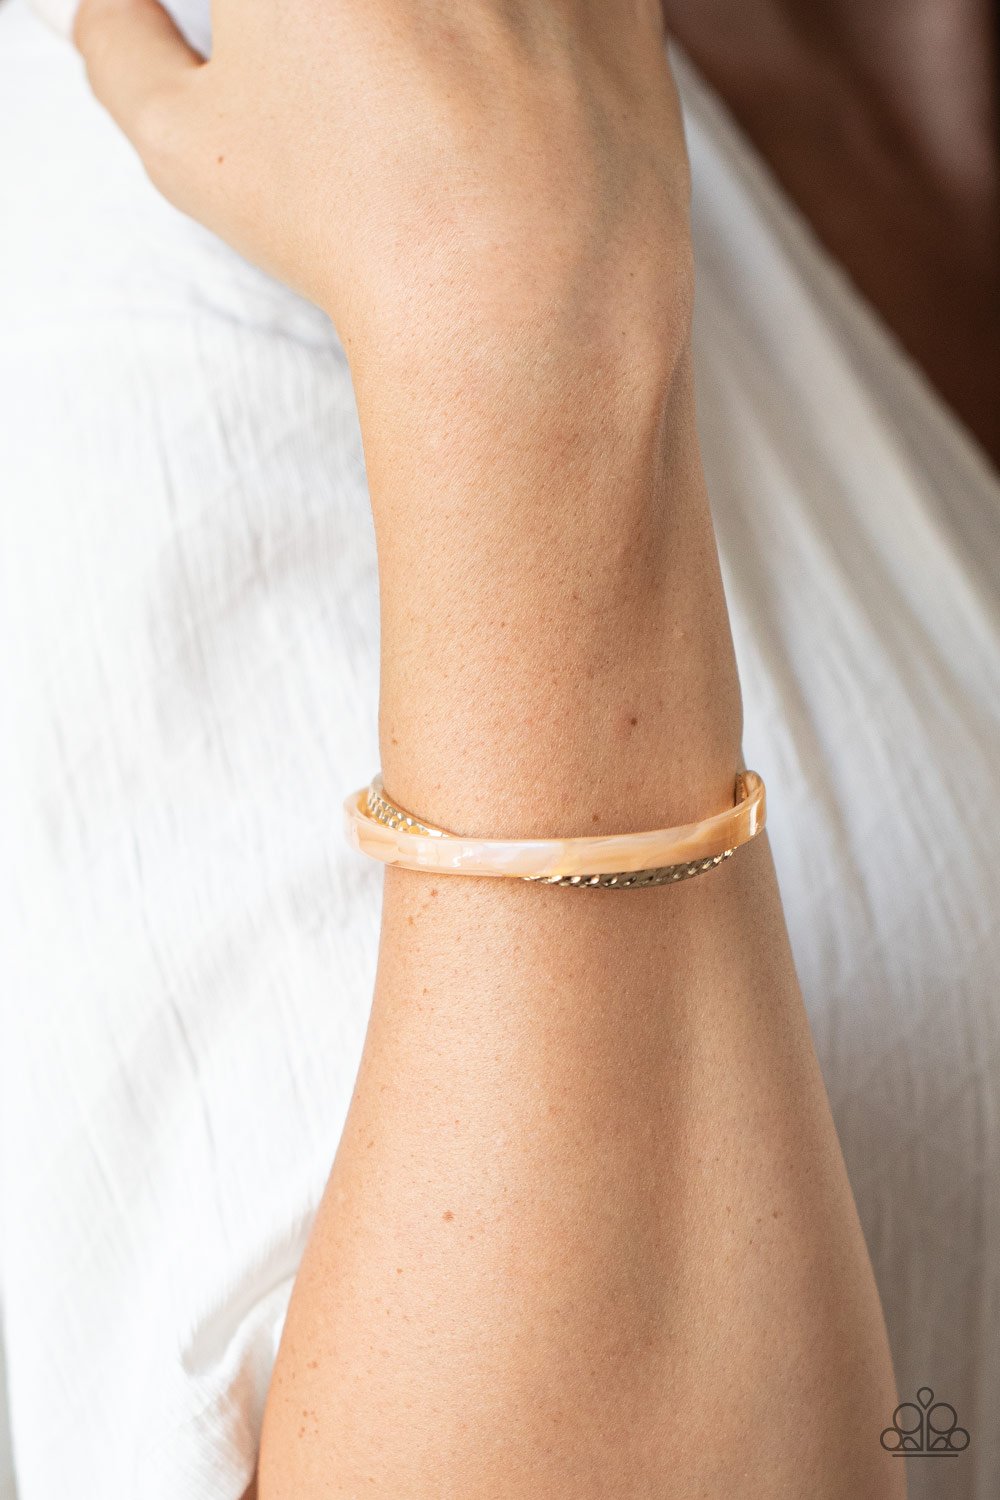 HAUTE On The Trail - Gold Acrylic Bracelet - Paparazzi Accessories - Featuring a marble-like finish, a golden acrylic frame curls around a dainty gold cuff, creating a colorfully stacked look across the wrist. Sold as one individual bracelet.